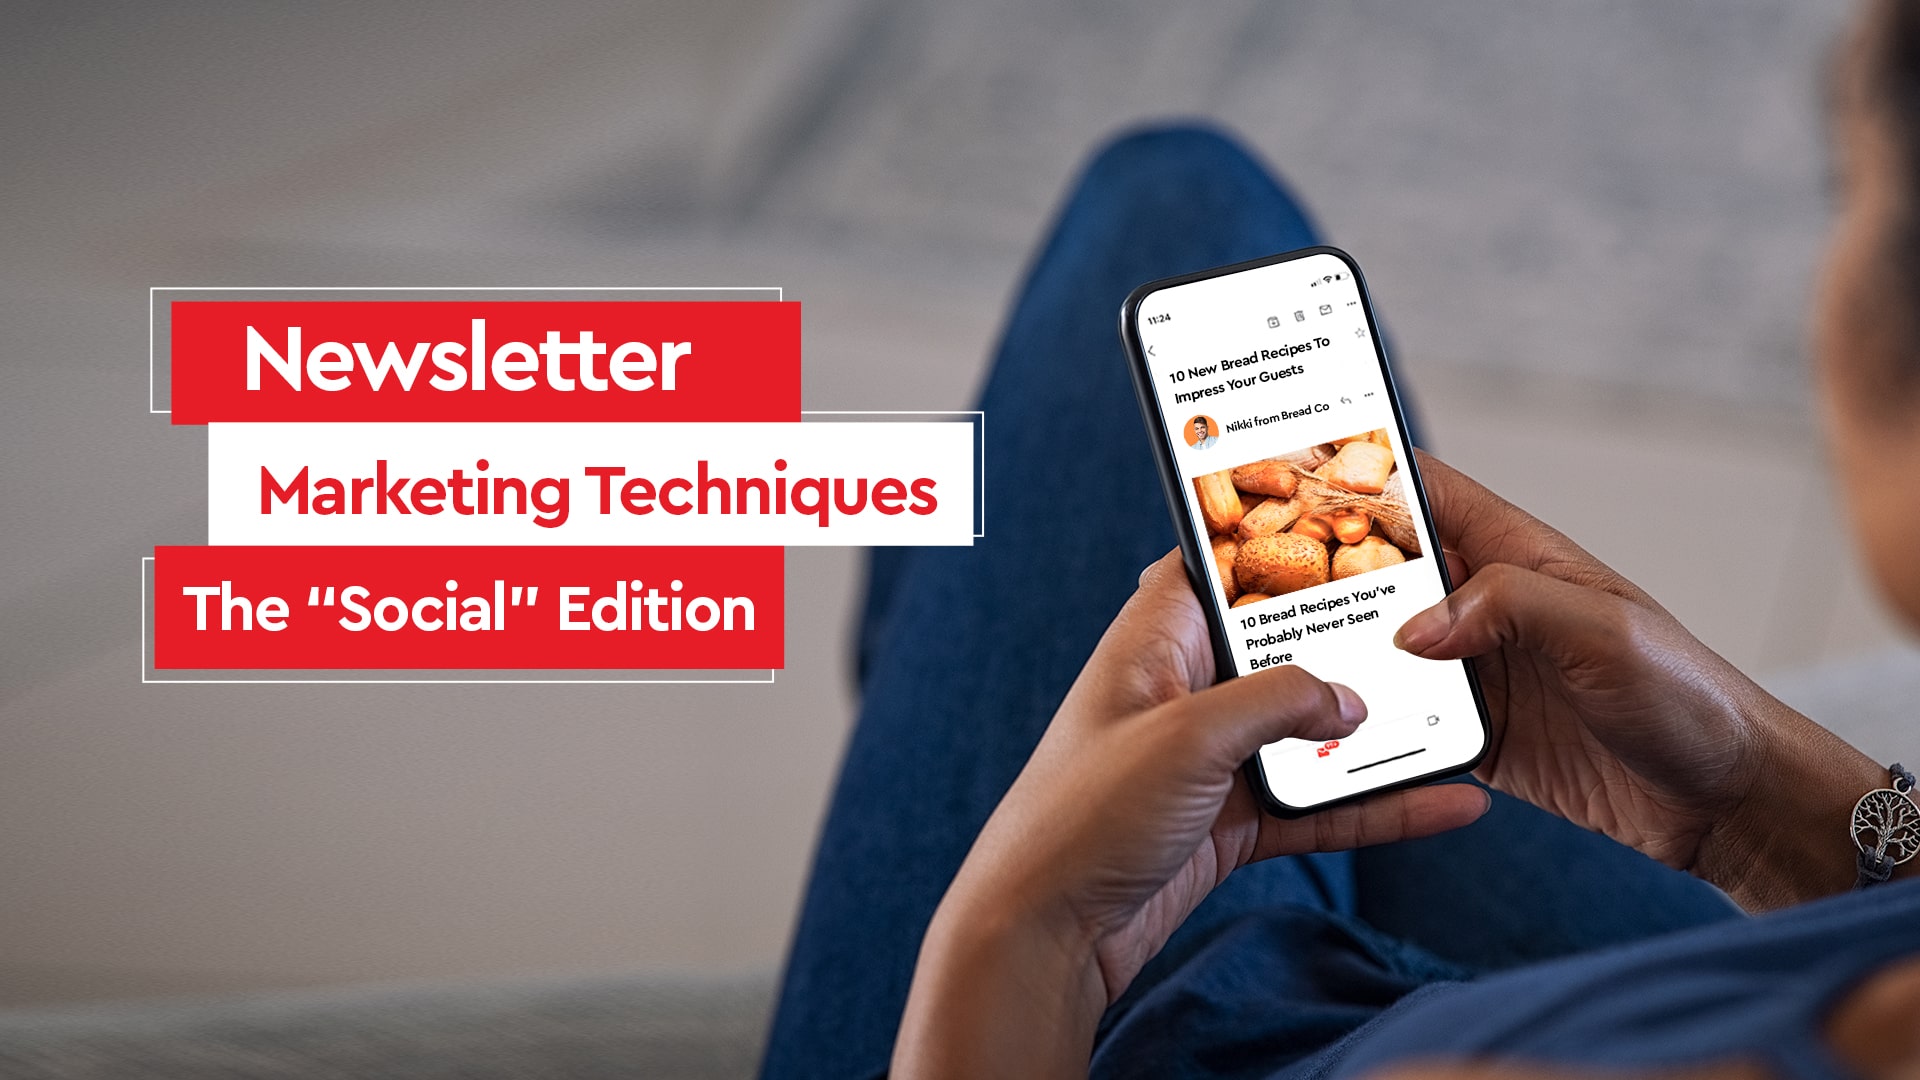 Newsletter Marketing Techniques – The “Social” Edition